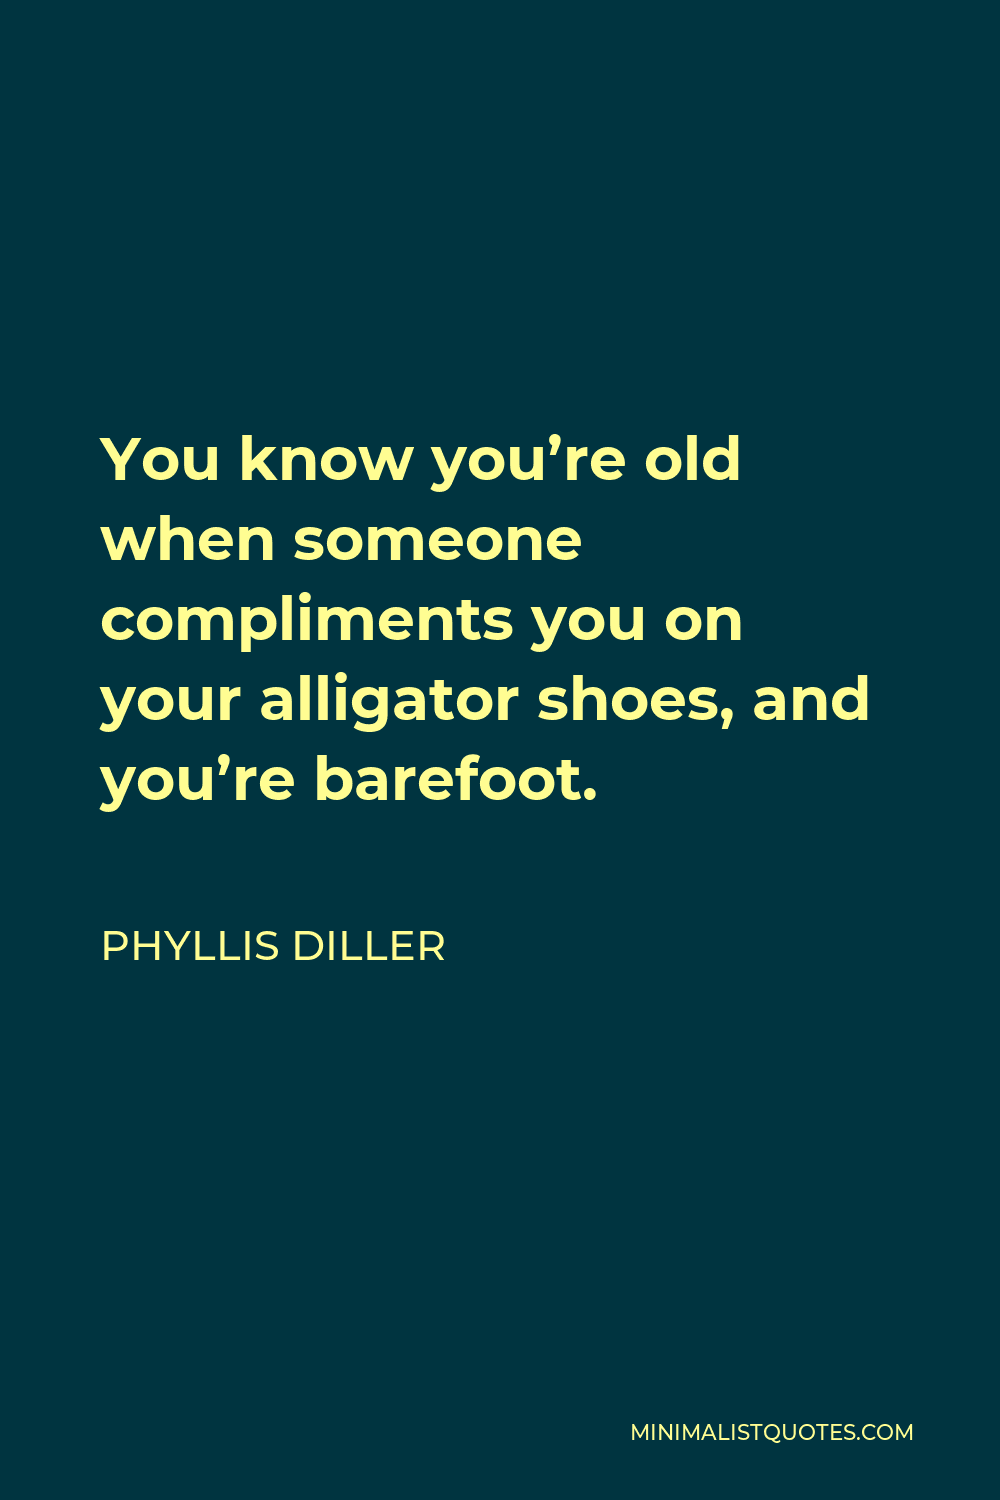 Phyllis Diller Quote - You know you’re old when someone compliments you on your alligator shoes, and you’re barefoot.